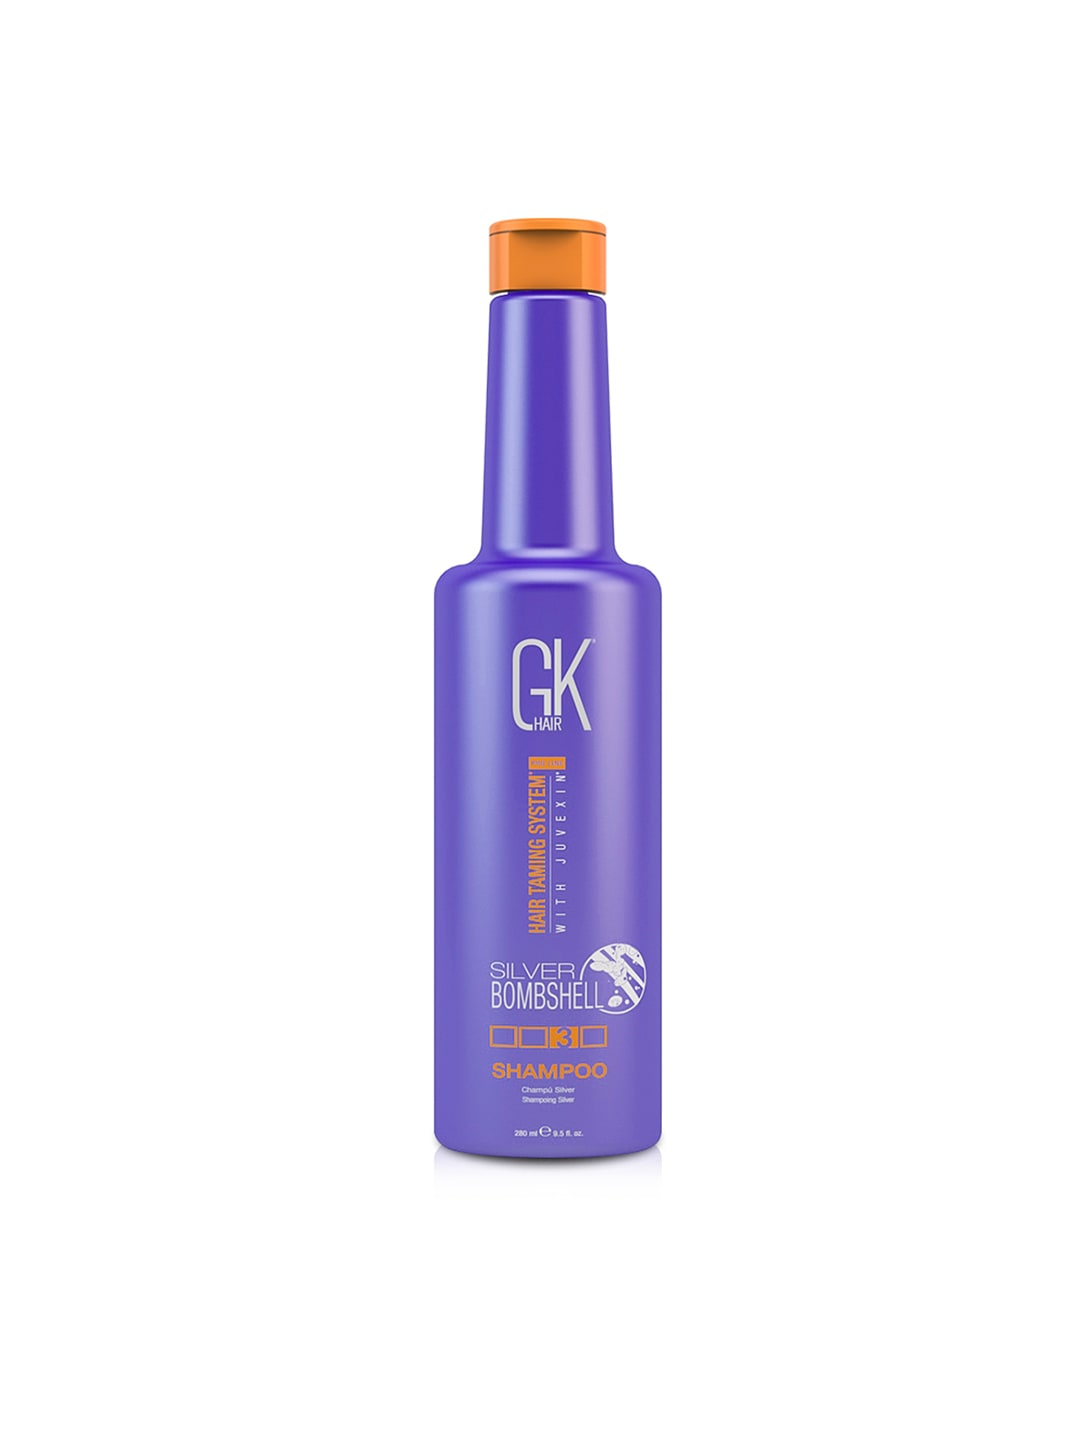 GK HAIR Taming System with Juvexin Global Keratin Silver Bombshell Shampoo 280 ml Price in India